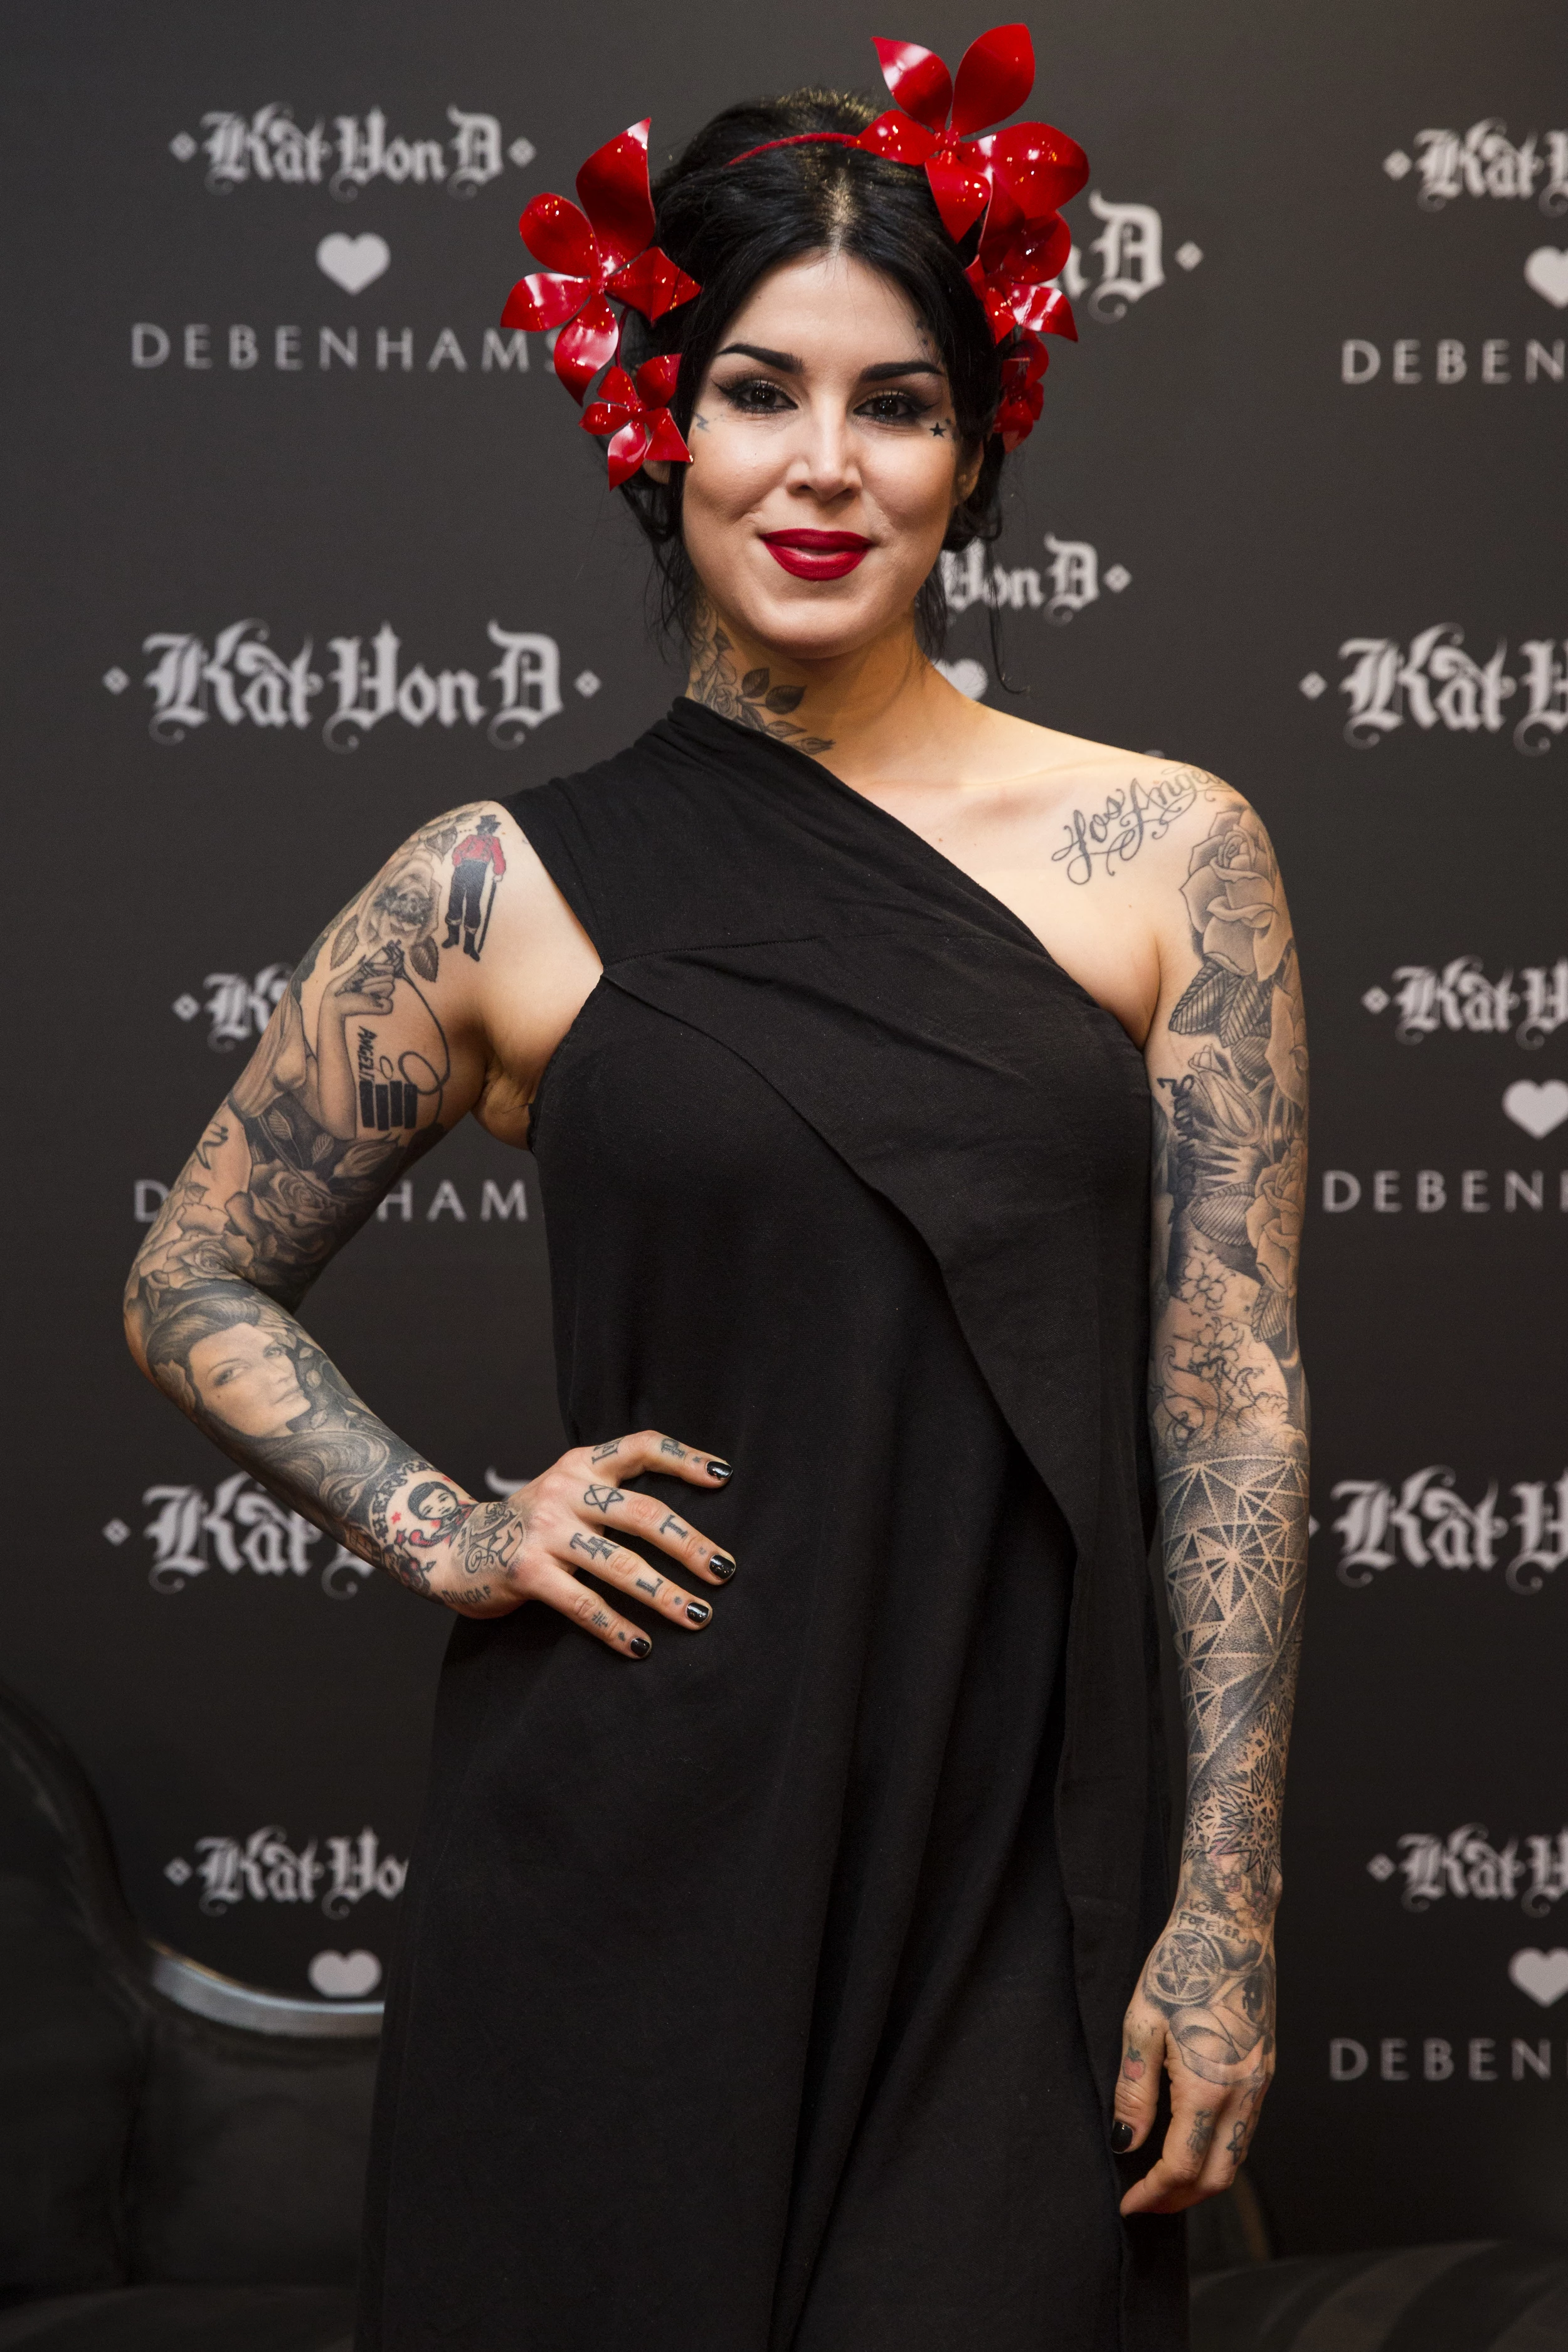 Heres Everything You Need To Know About Blackout TattoosThe Current Trend  In Body Ink